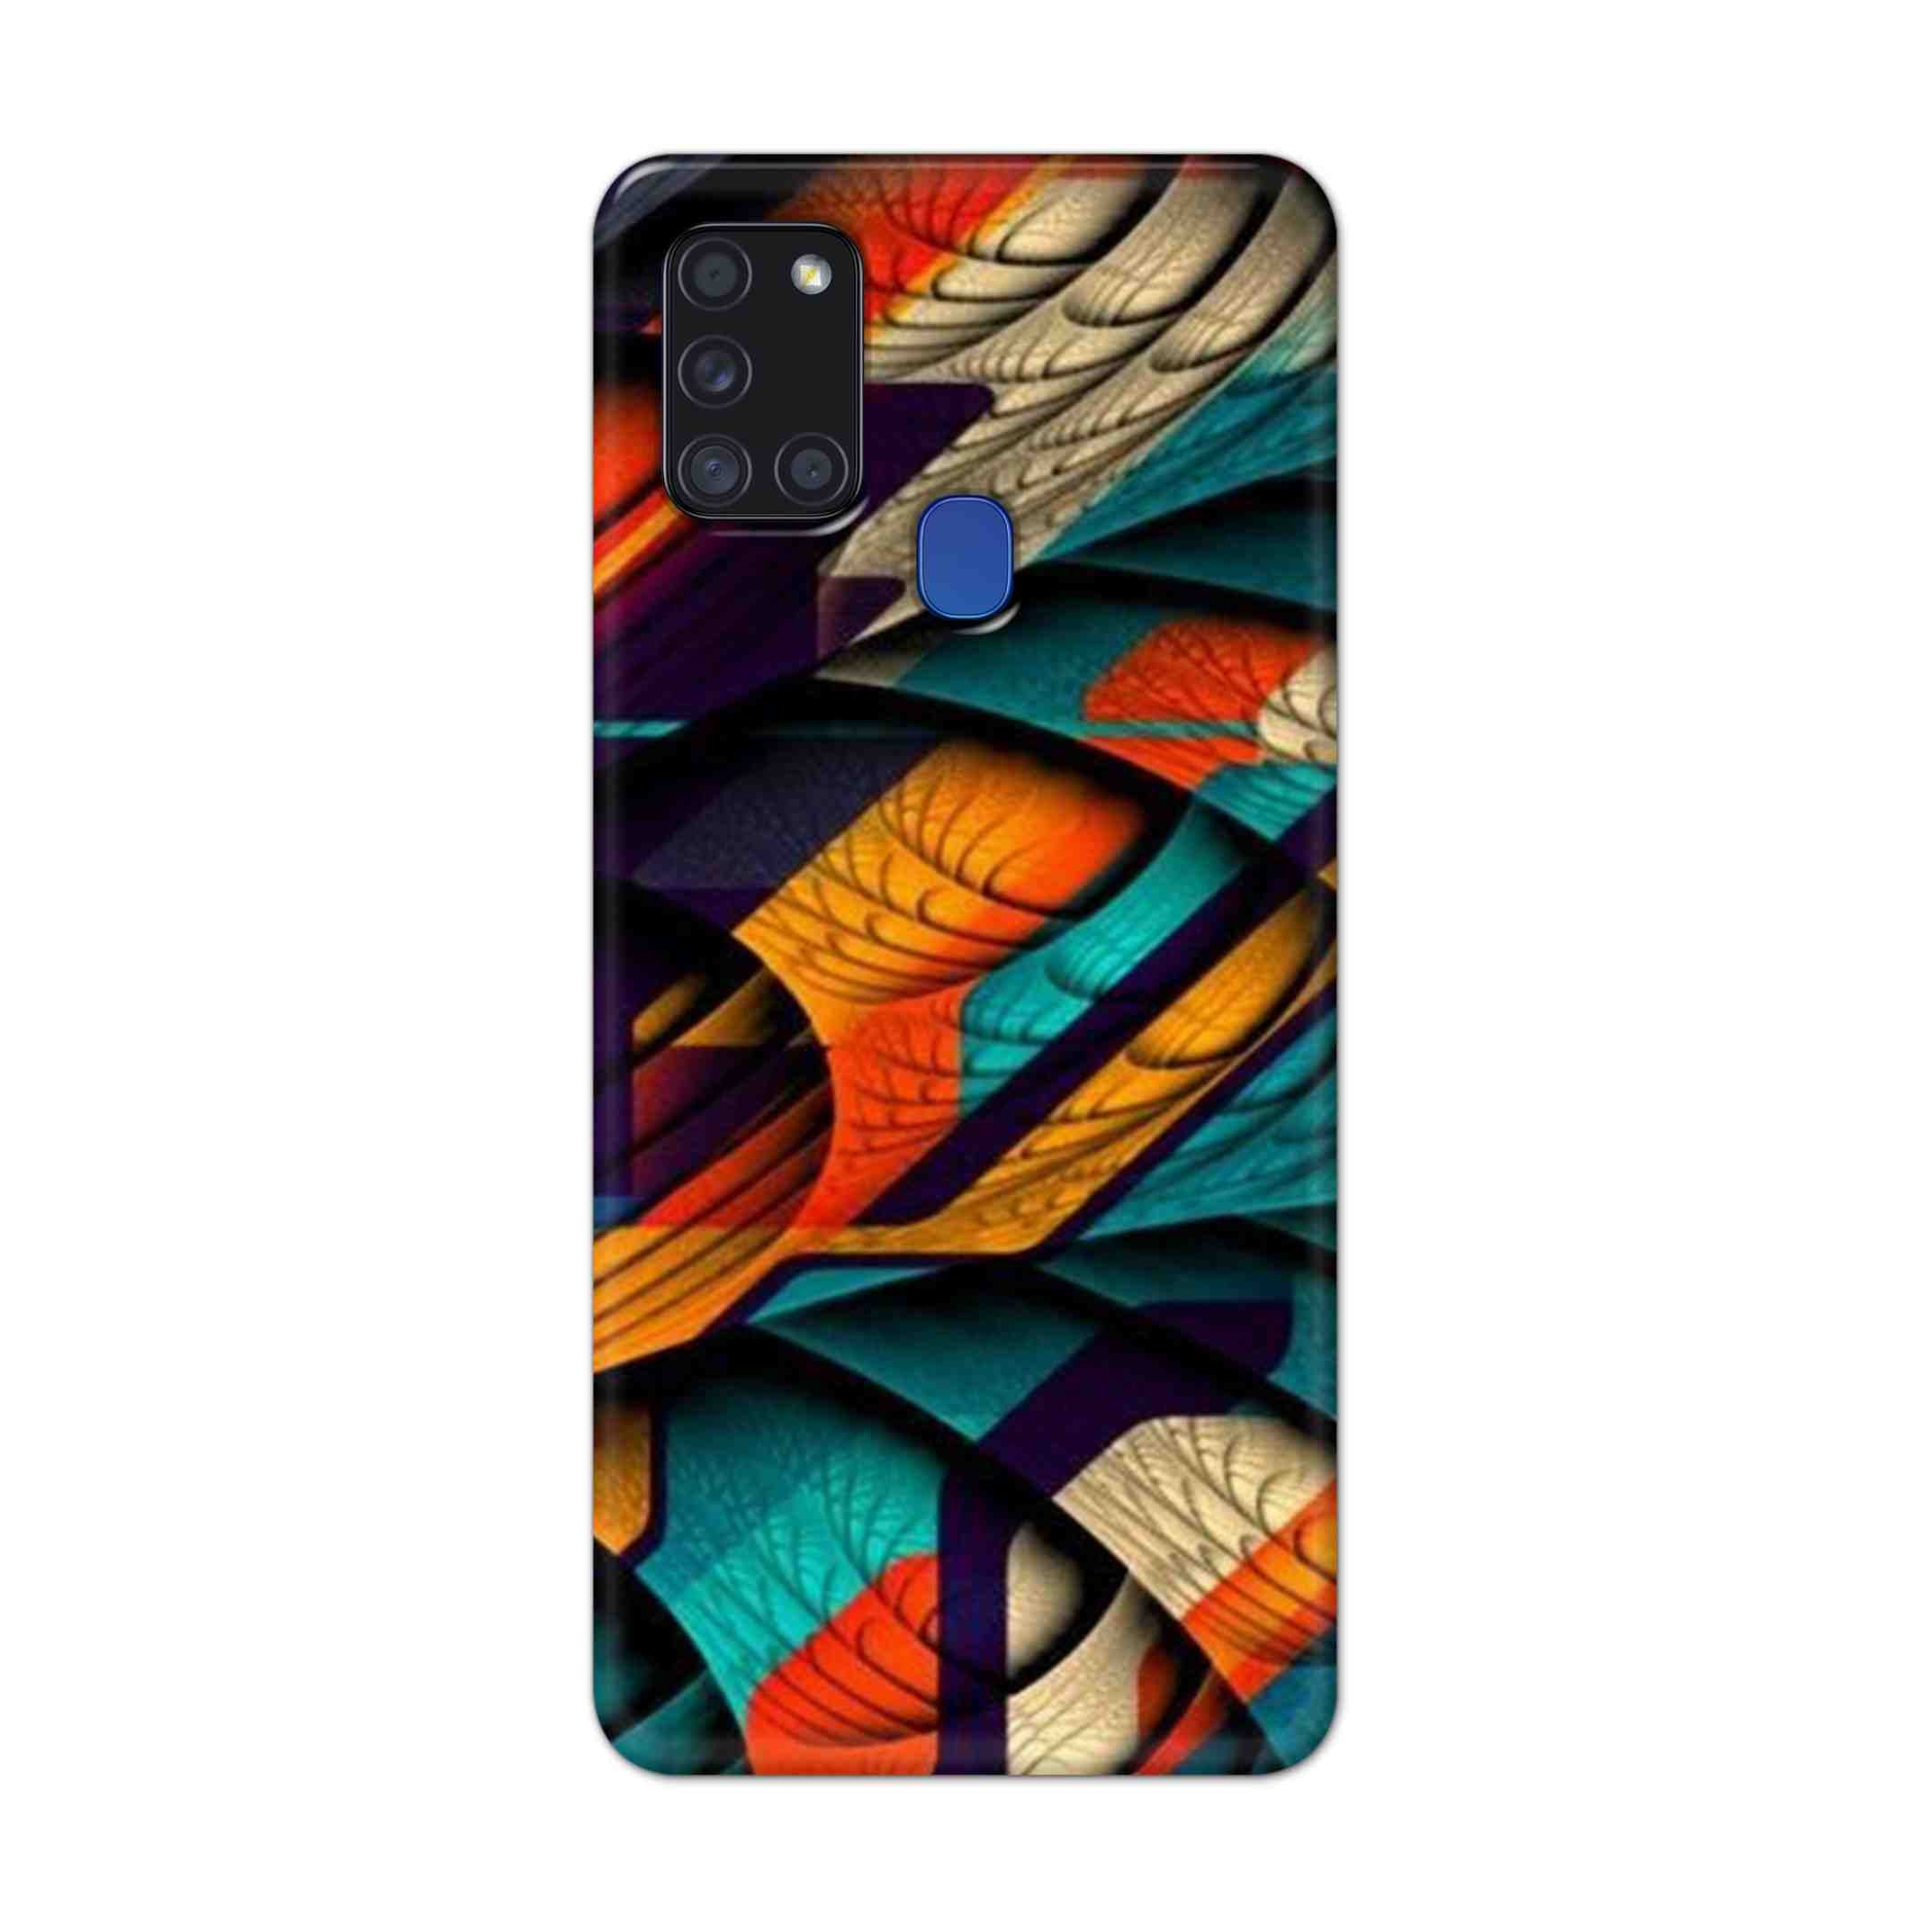 Buy Colour Abstract Hard Back Mobile Phone Case Cover For Samsung Galaxy A21s Online